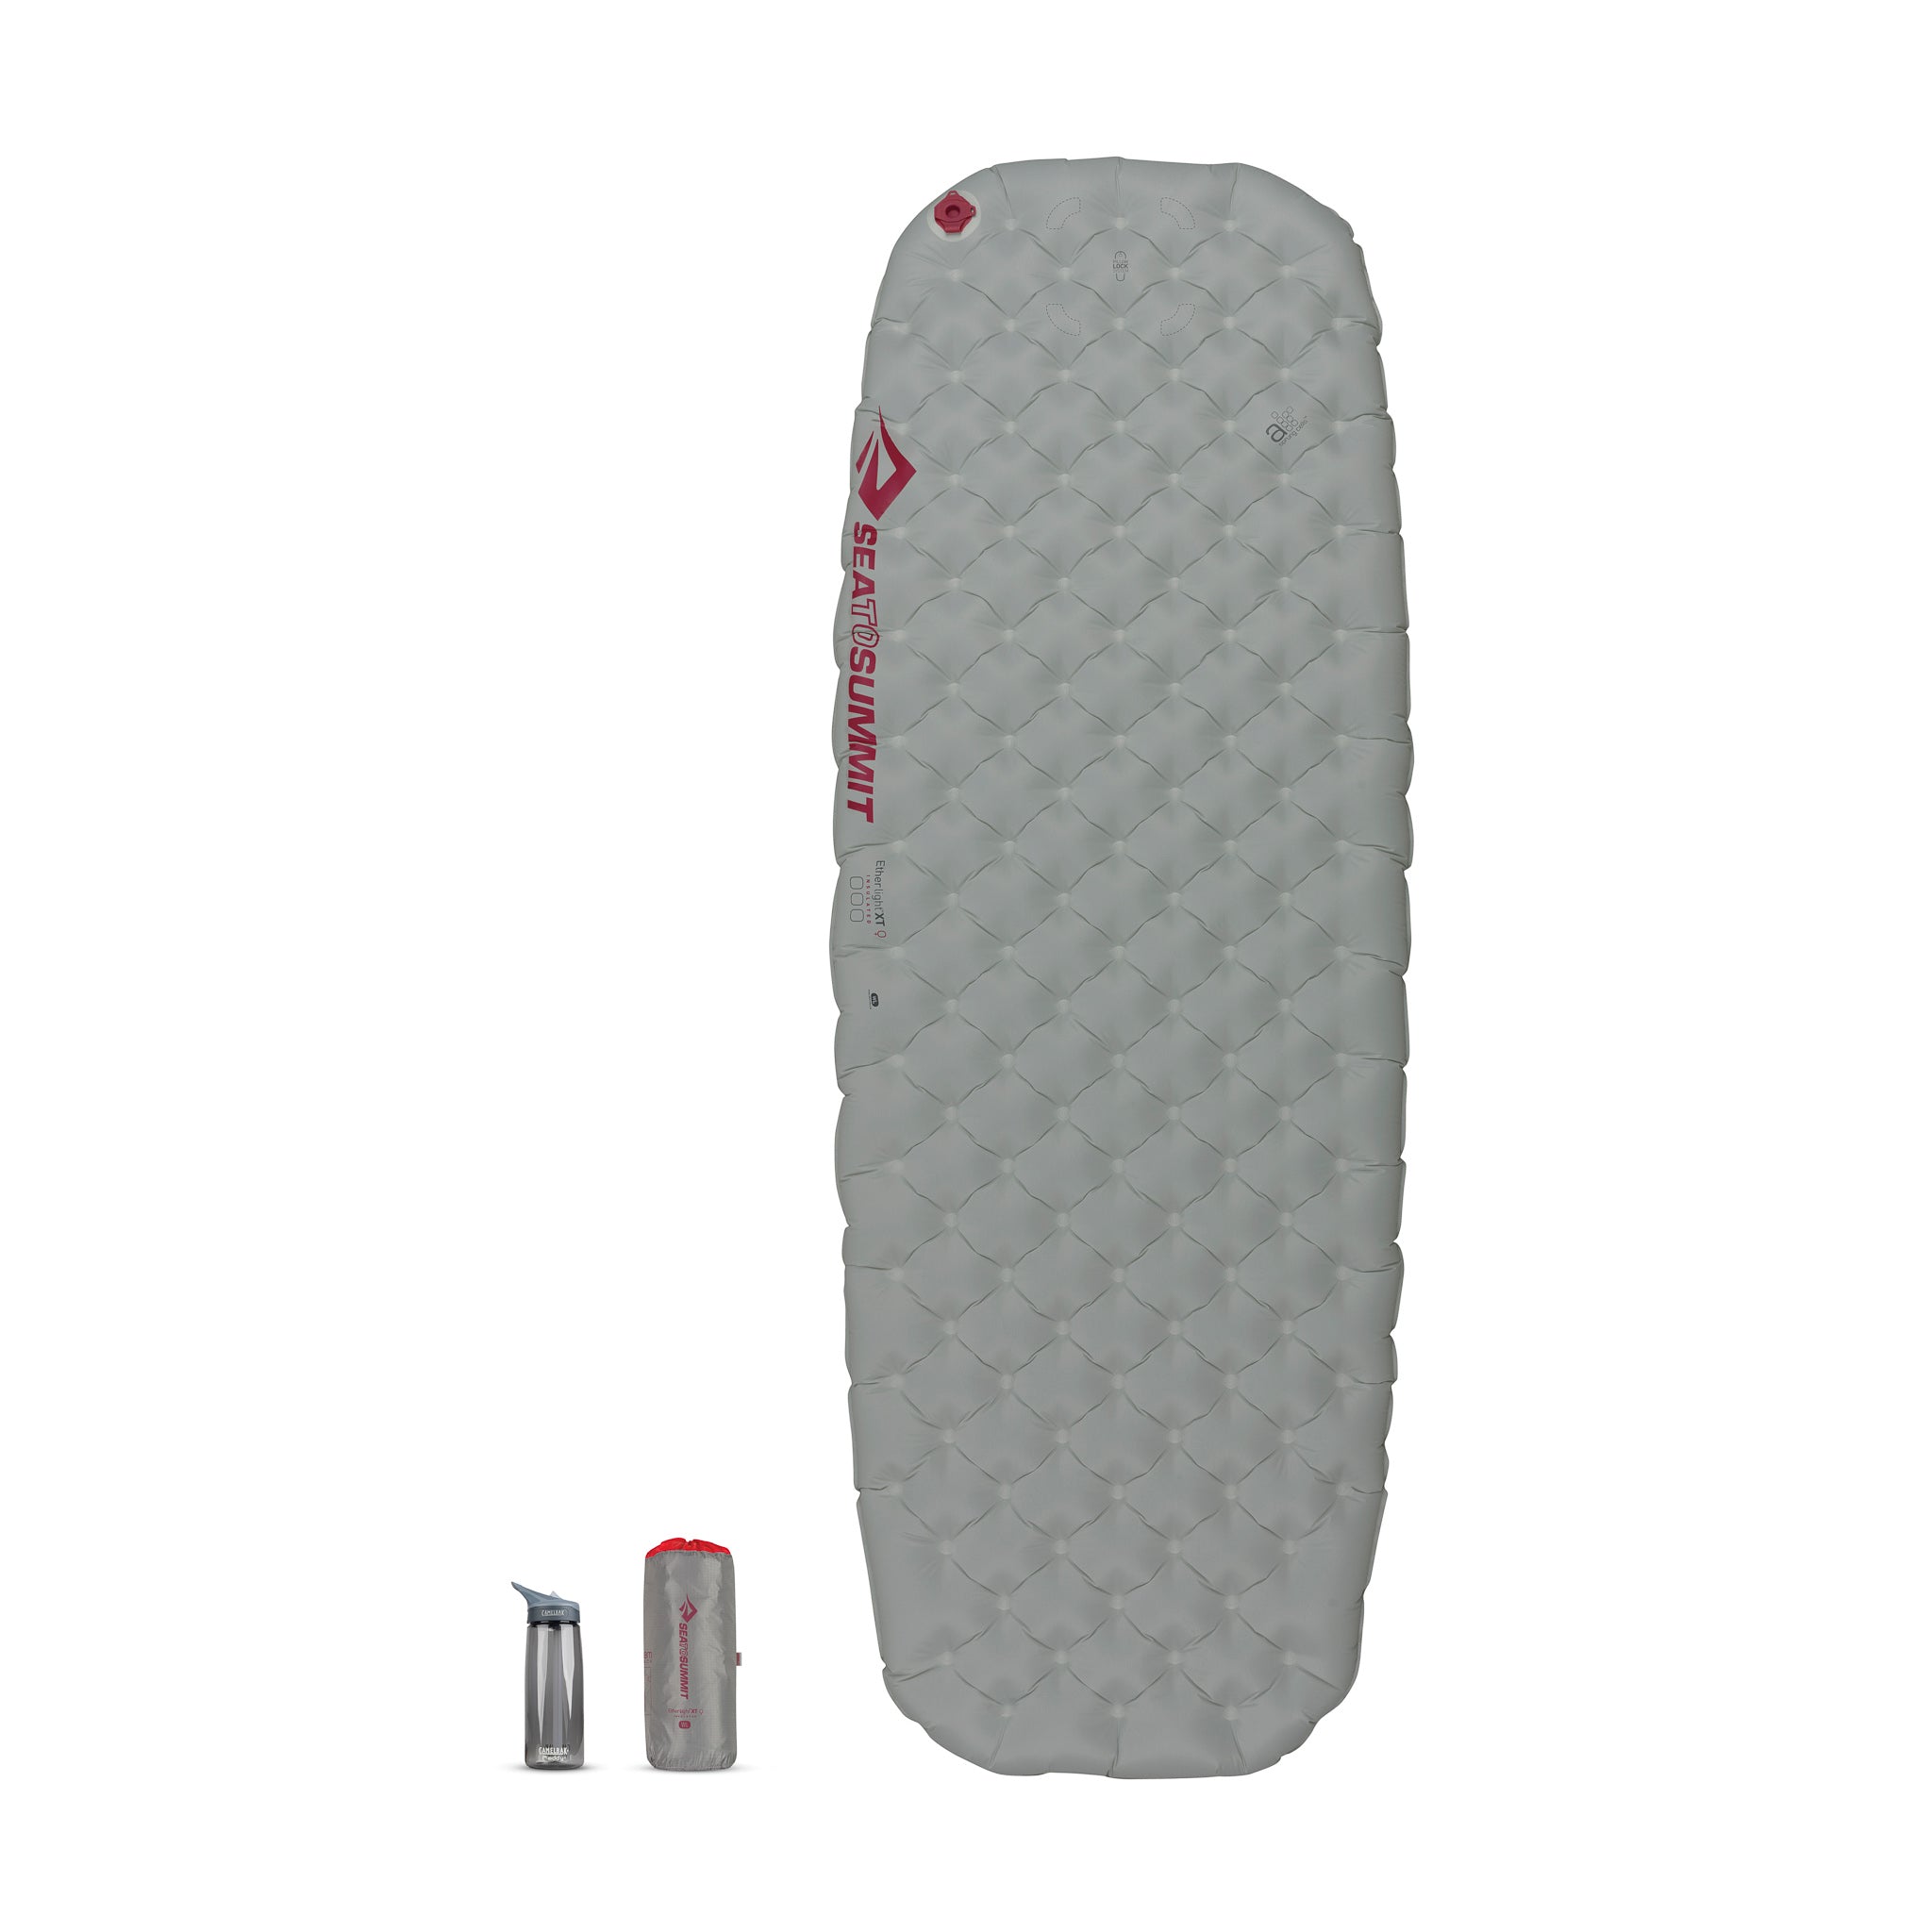 Large || Ether Light XT Insulated Women's Air Sleeping Pad